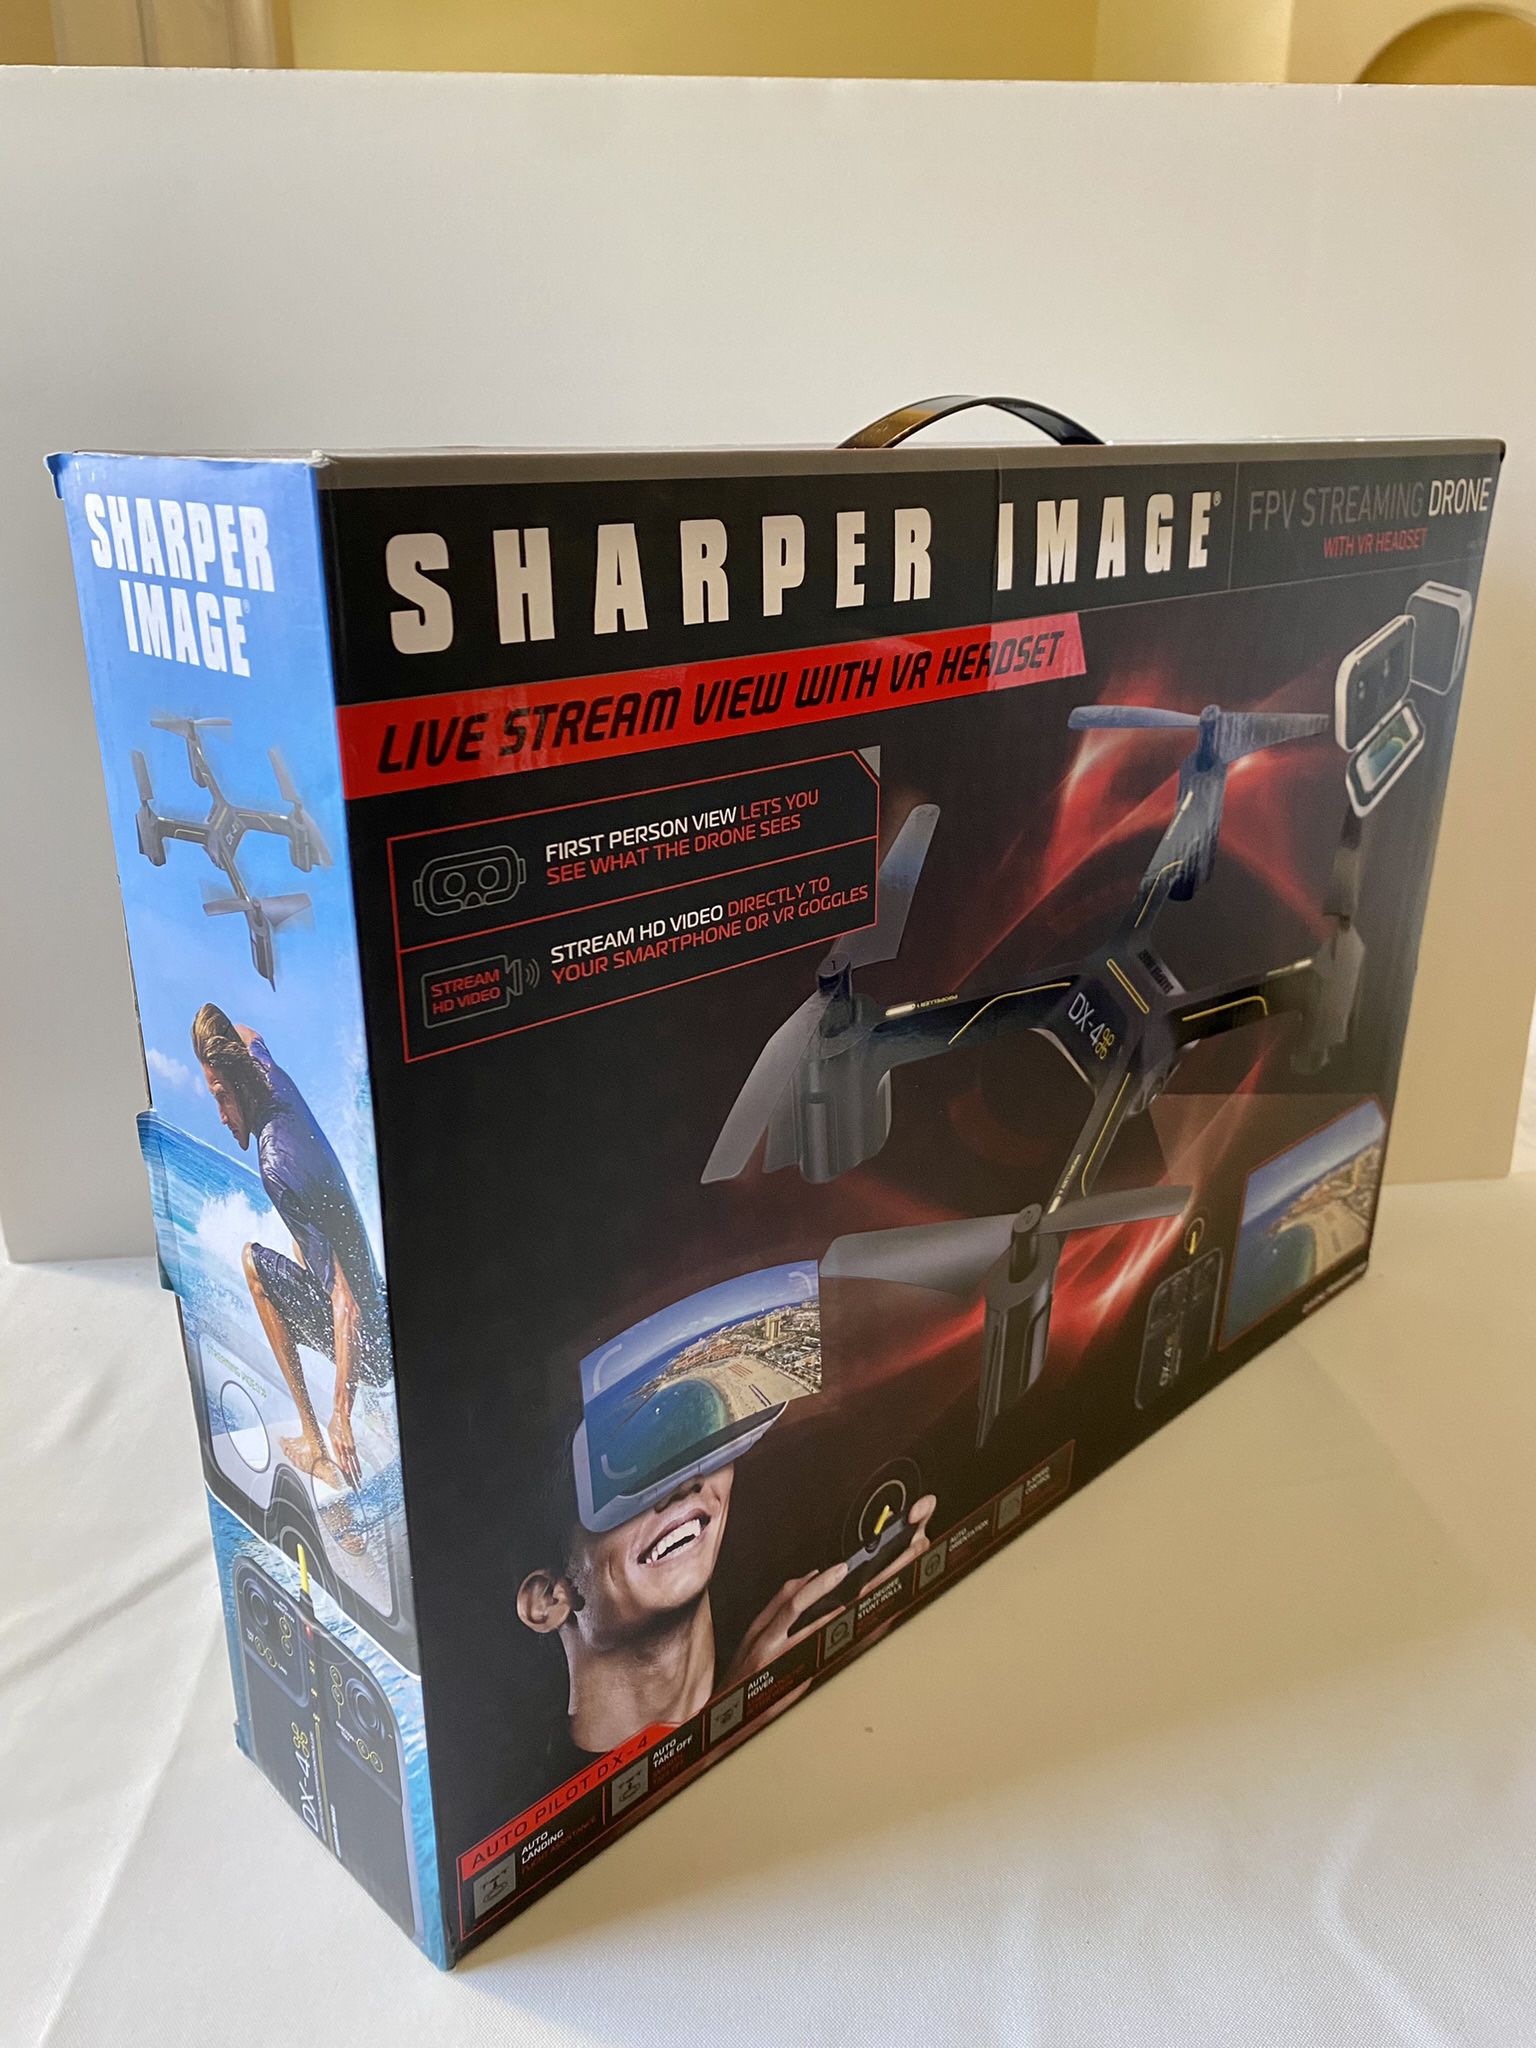 Sharper Image FPV Streaming Drone With VR Headset New In Box